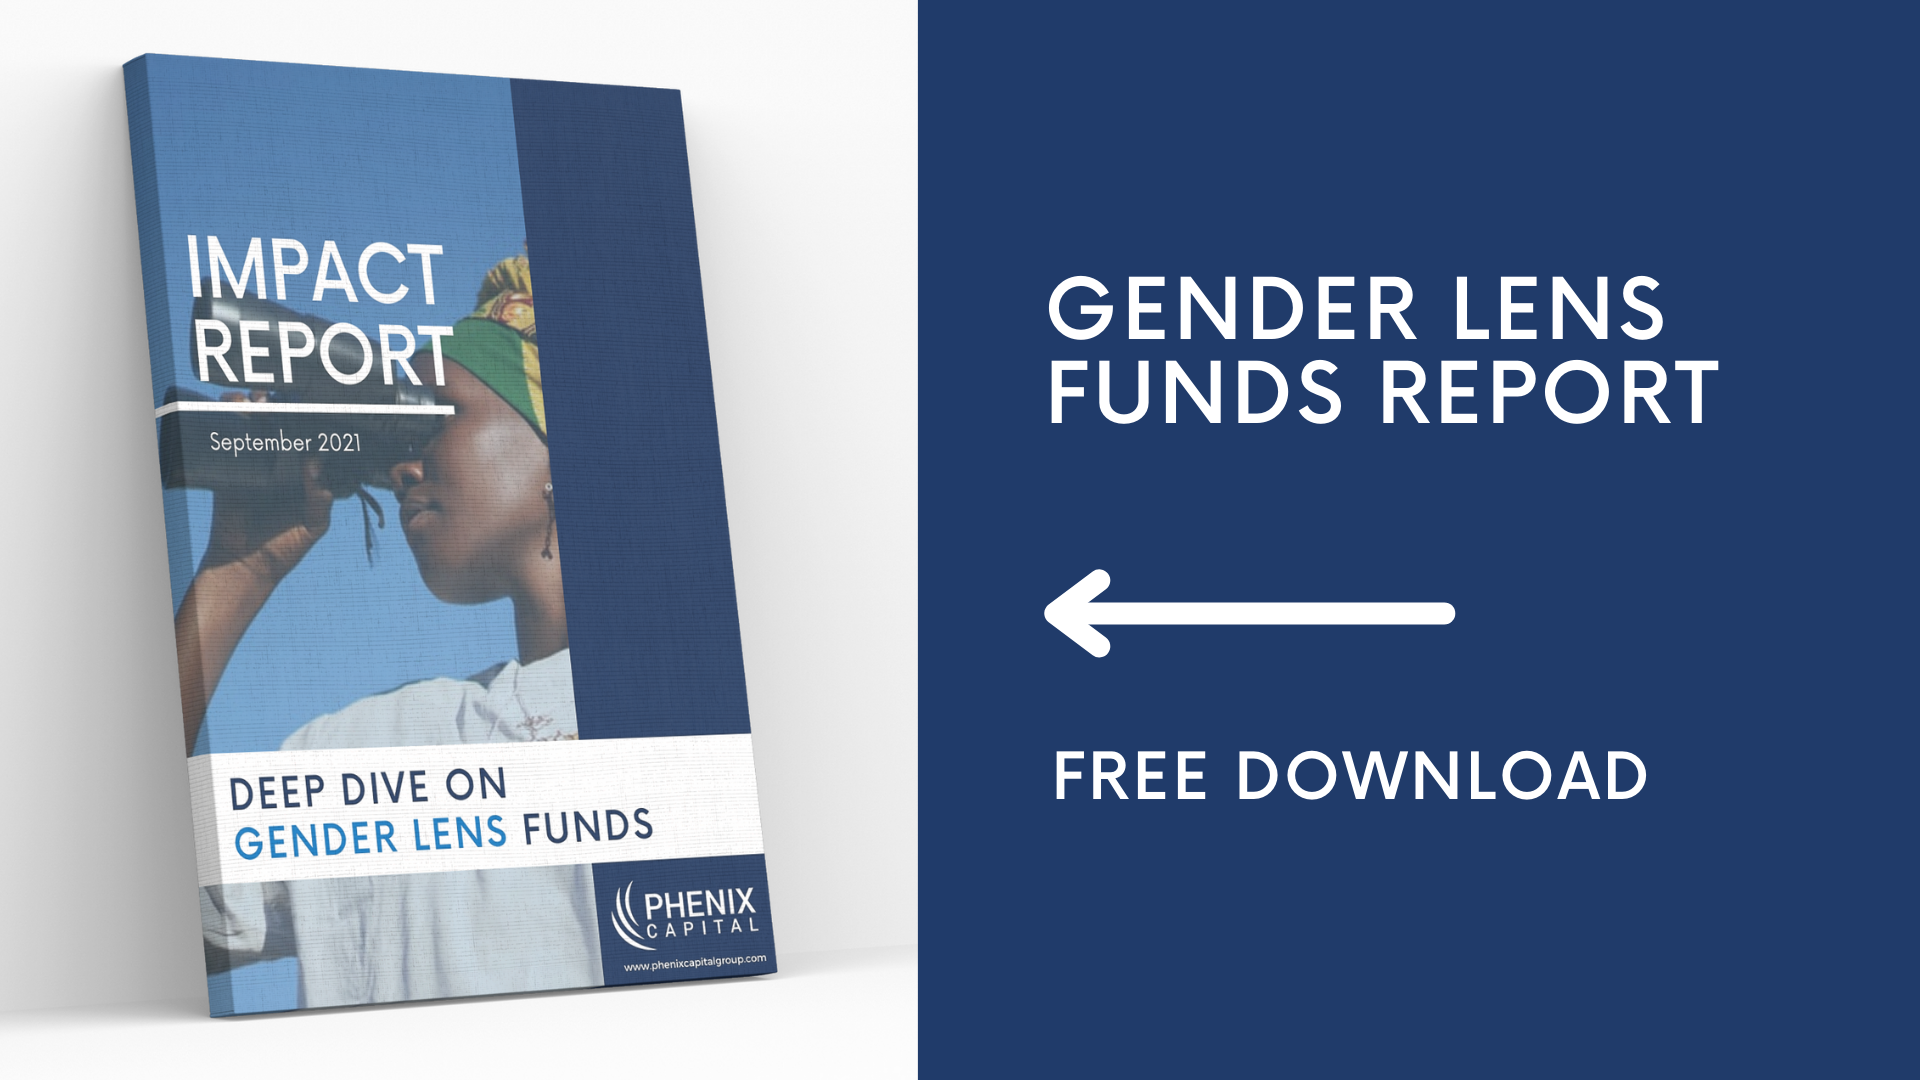 PRESS RELEASE: Impact Report reveals Gender Lens Funds data and sophisticated impact measuring methods